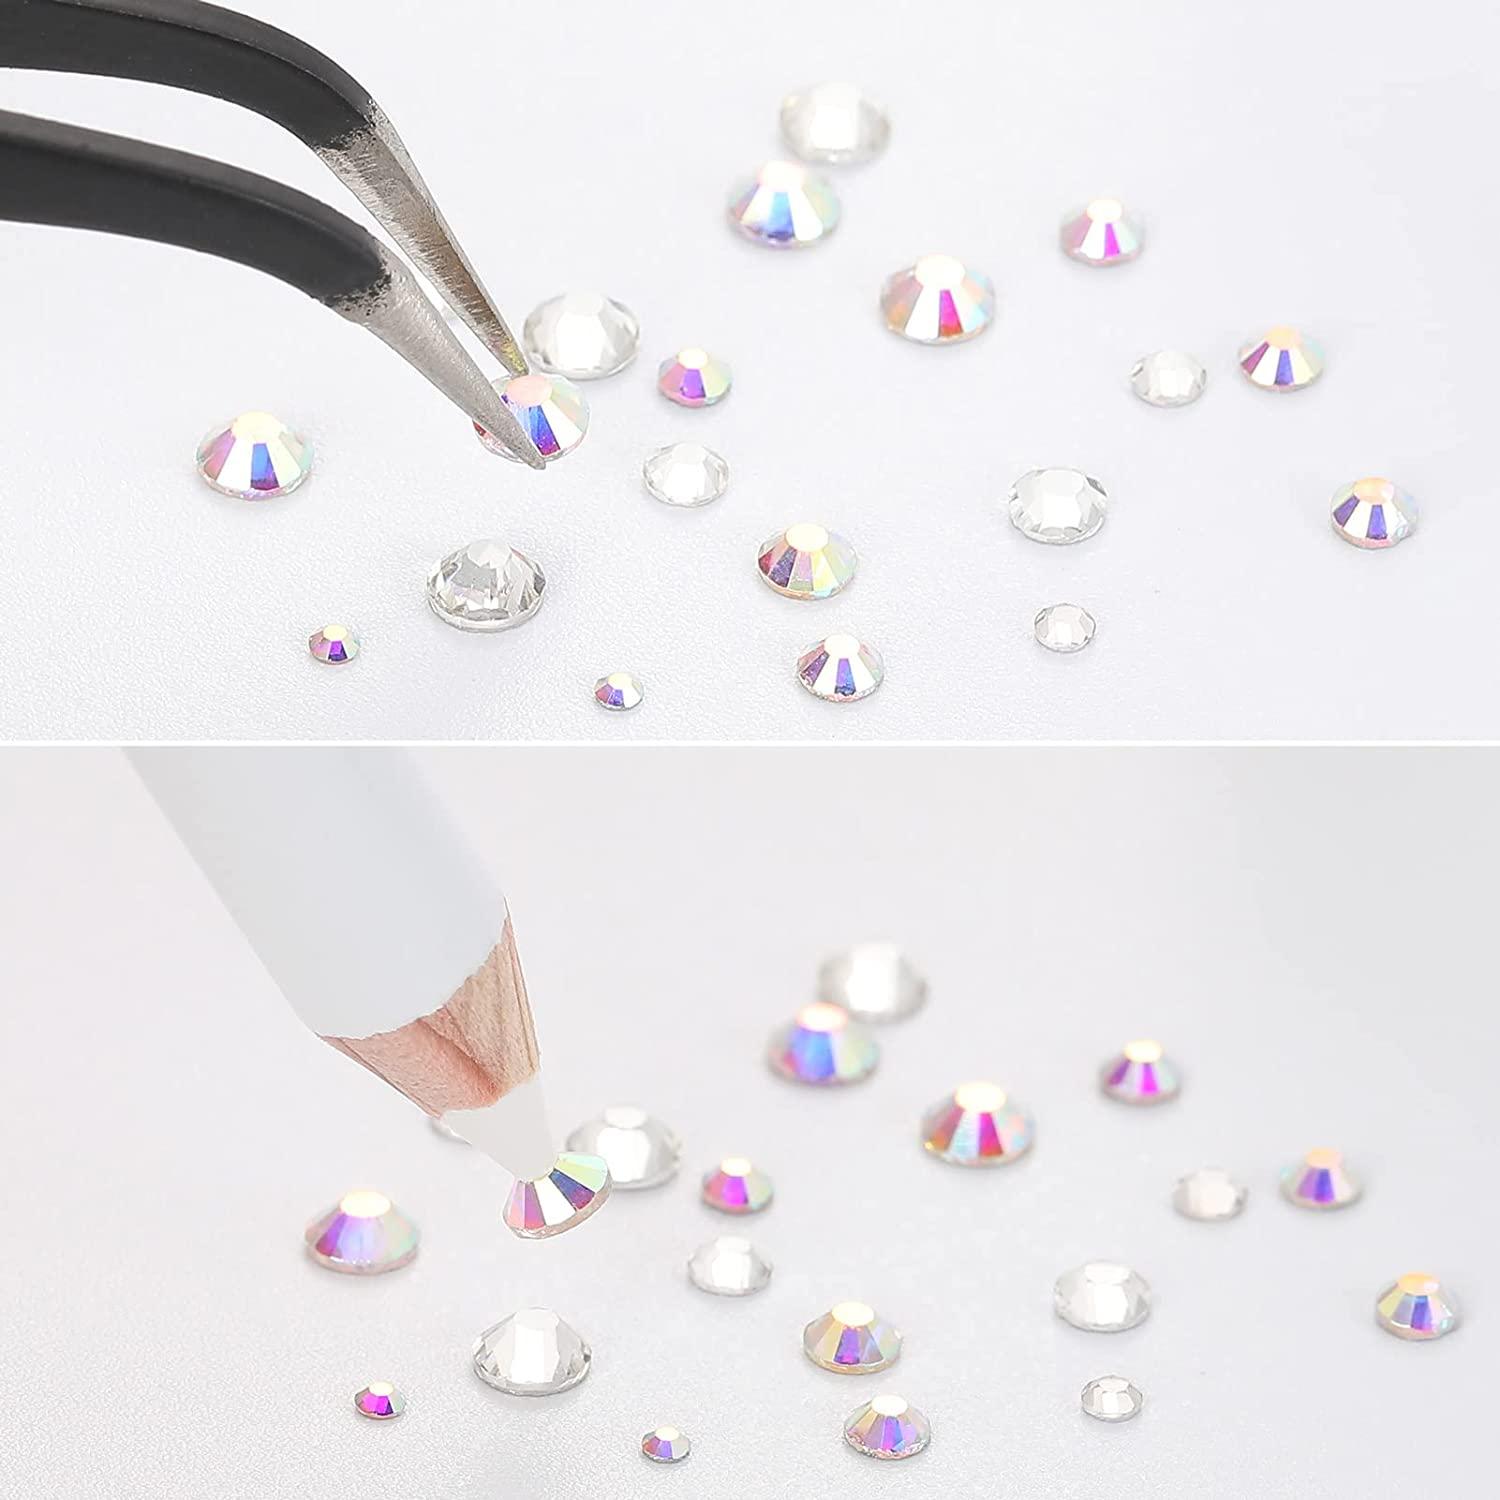 Beadsland 5280 Pieces Nail Art Rhinestones,Small Rhinestone for Makeup,Face  Eye Rhinestones Set Mix 12 Colors(SS10) and 6 Sizes(SS4-SS16) for Clear